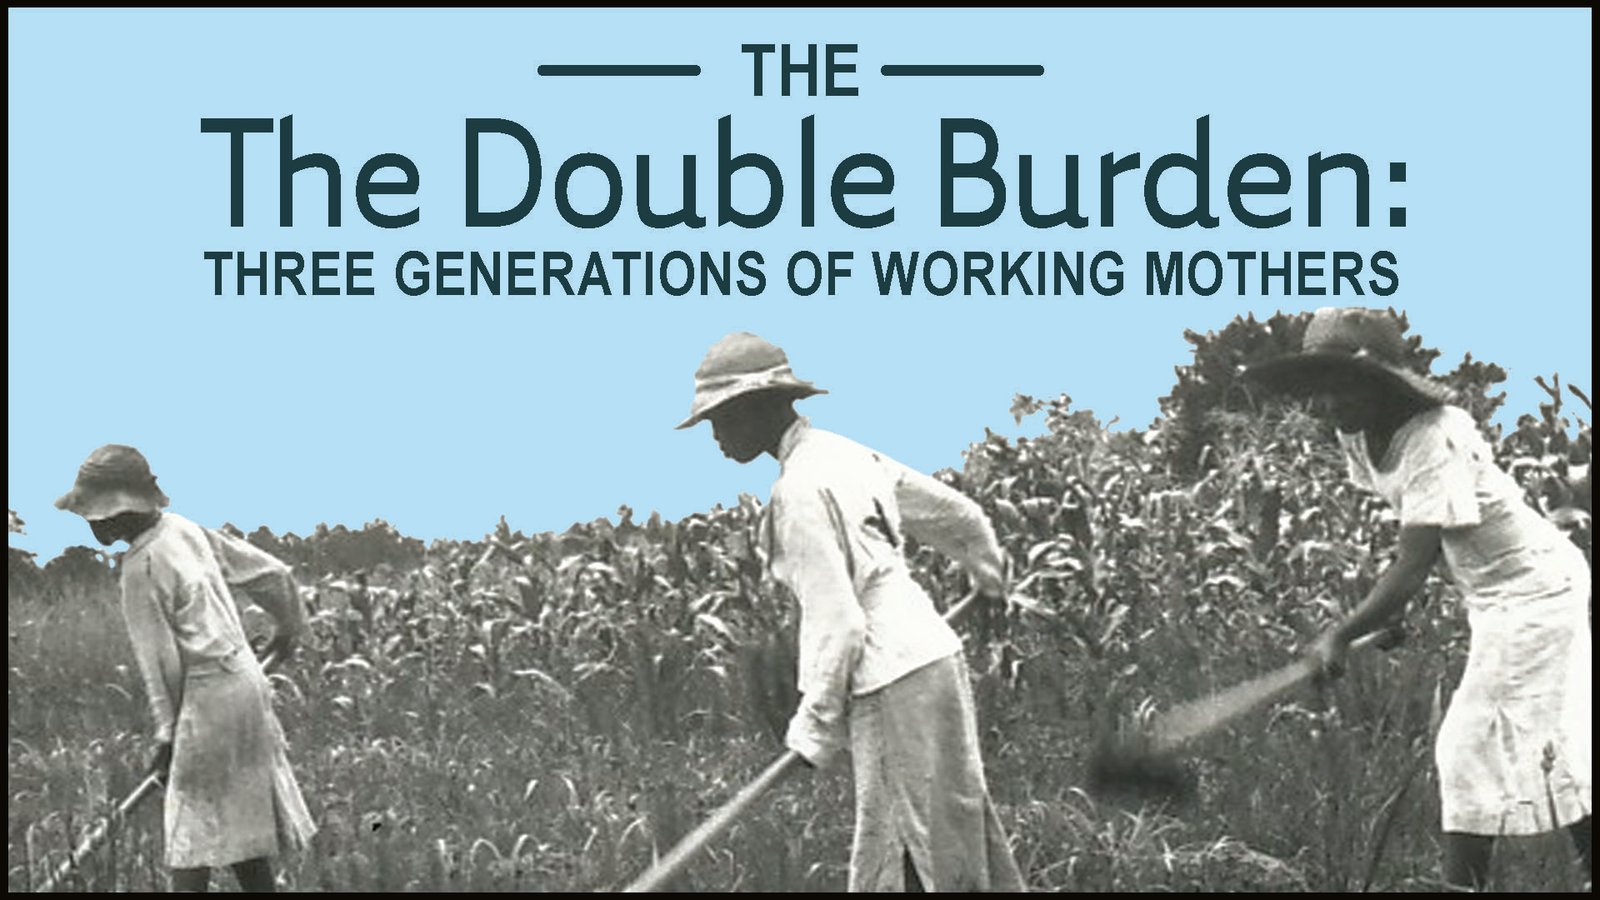 The Double Burden - Three Generations of Working Mothers